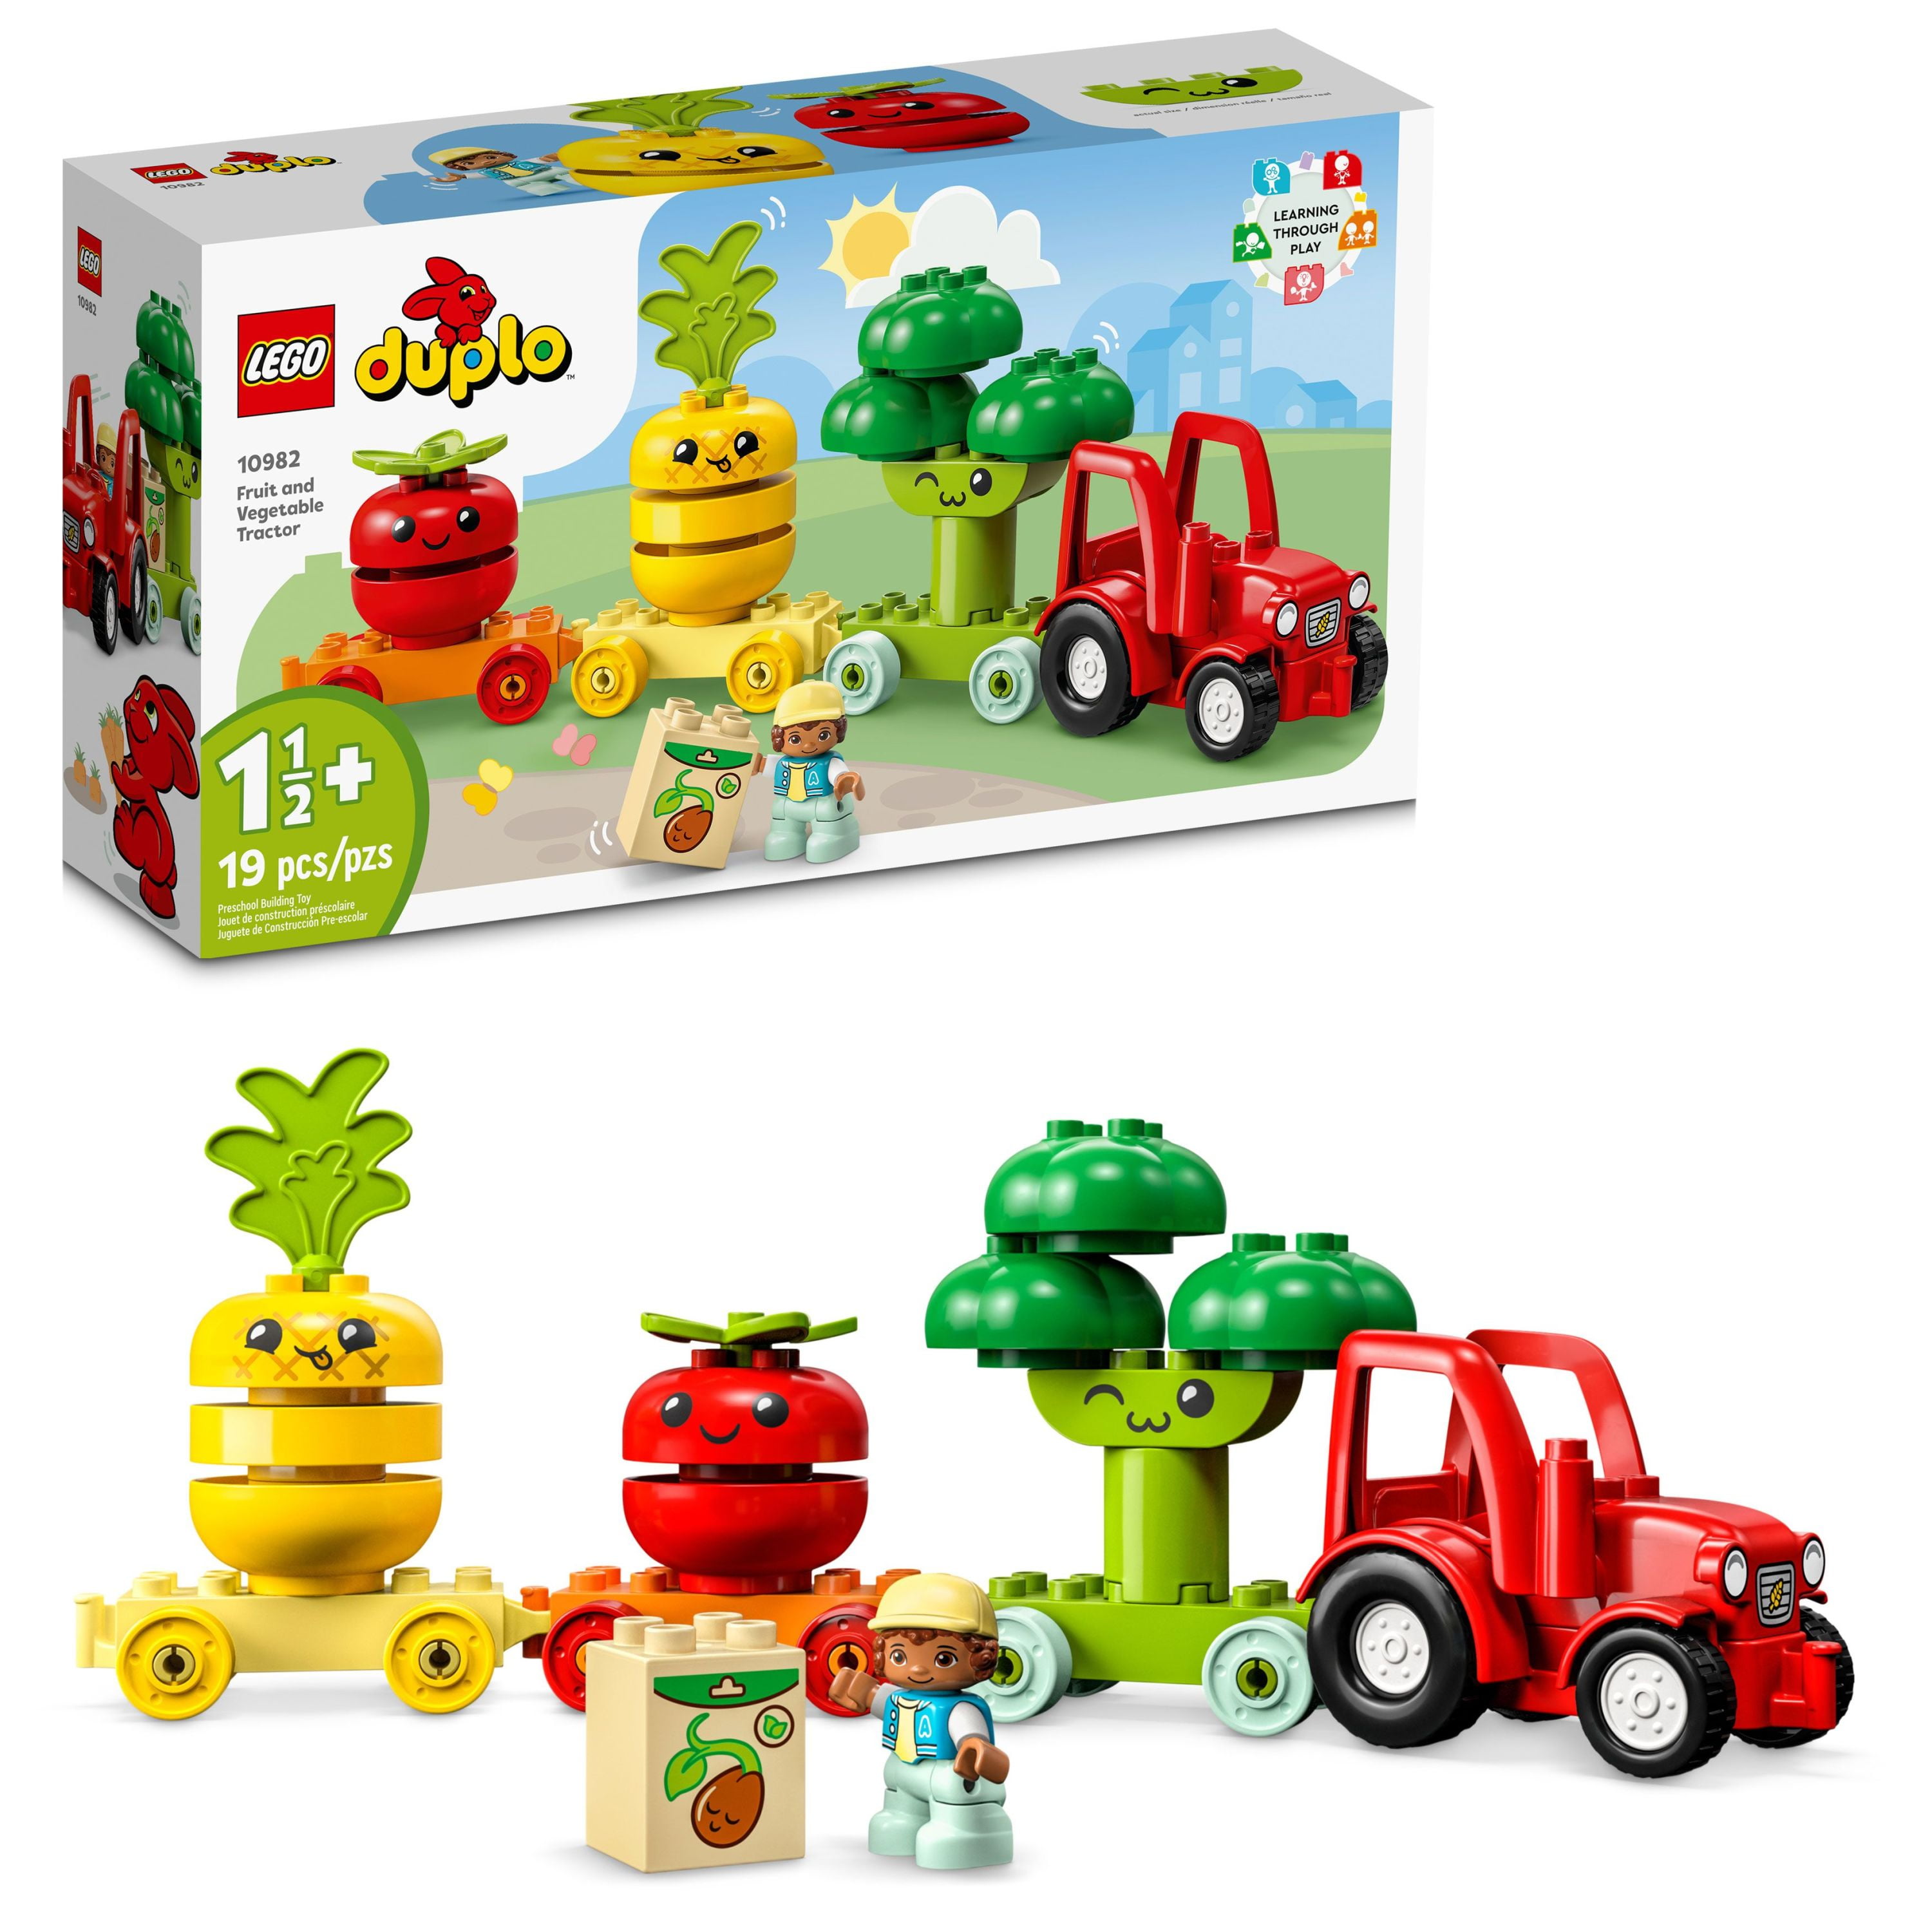 LEGO DUPLO My First Fruit and Vegetable Tractor Toy , Stacking and  Color Sorting Toys for Babies and Toddlers ages 1 .5   3 Years Old,